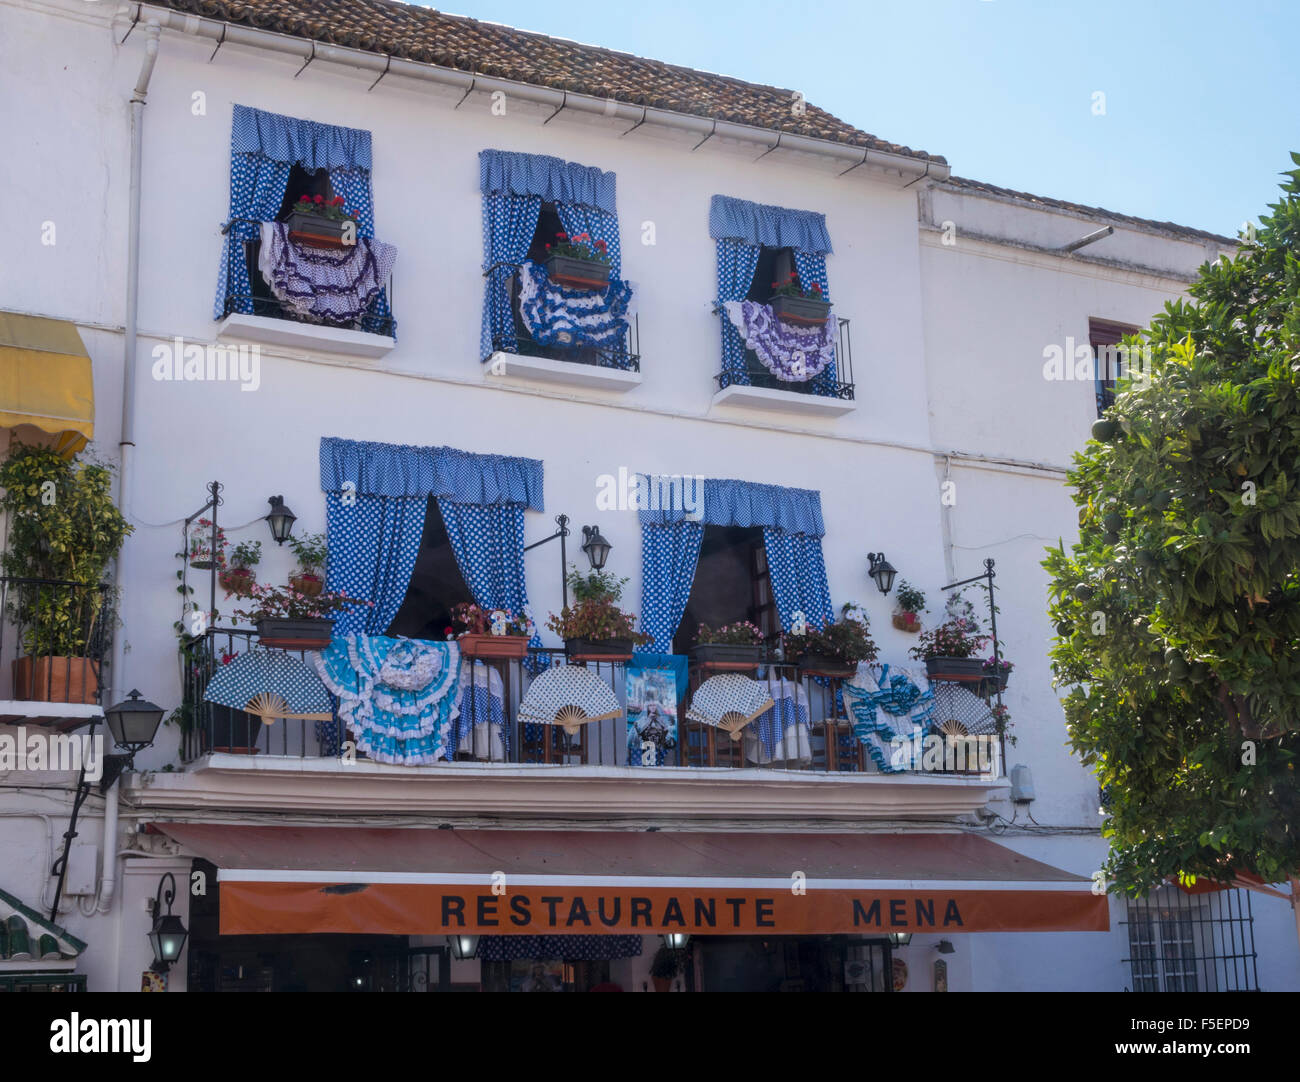 Decorated windows of a restaurant in Plaza de los Naranjos in Marbella, Andalucia, Spain Stock Photo